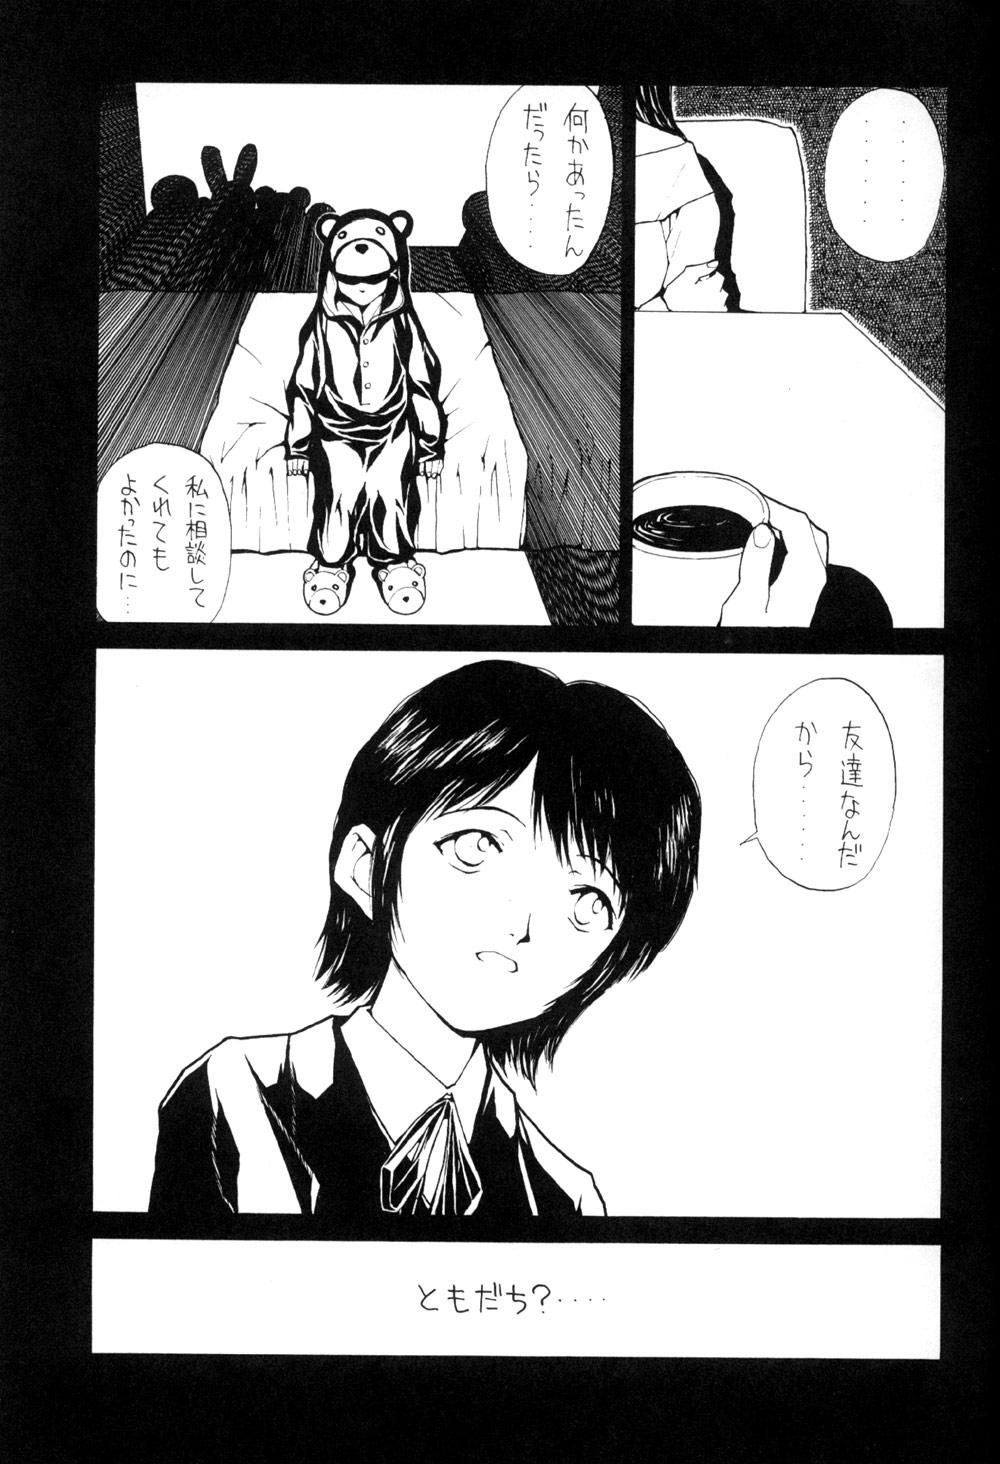 Livecam The Lain Song - Serial experiments lain Prostitute - Page 14